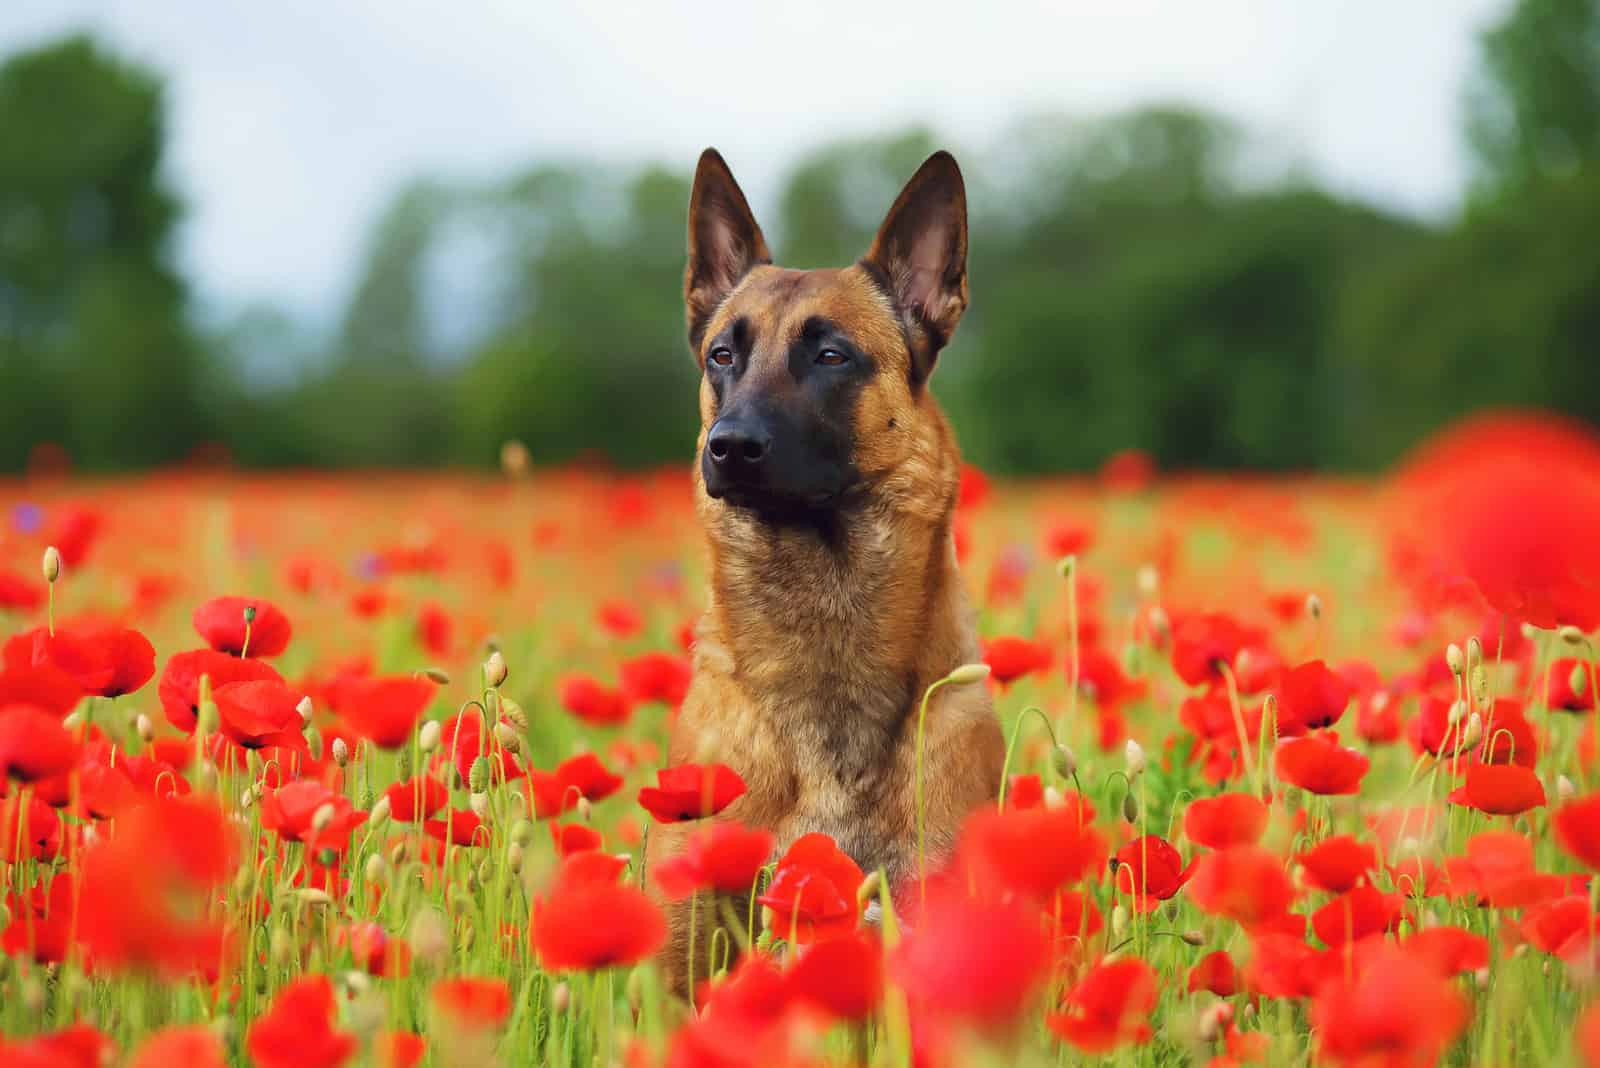 14 Best Dog Foods For Belgian Malinois: What To Feed Mals?